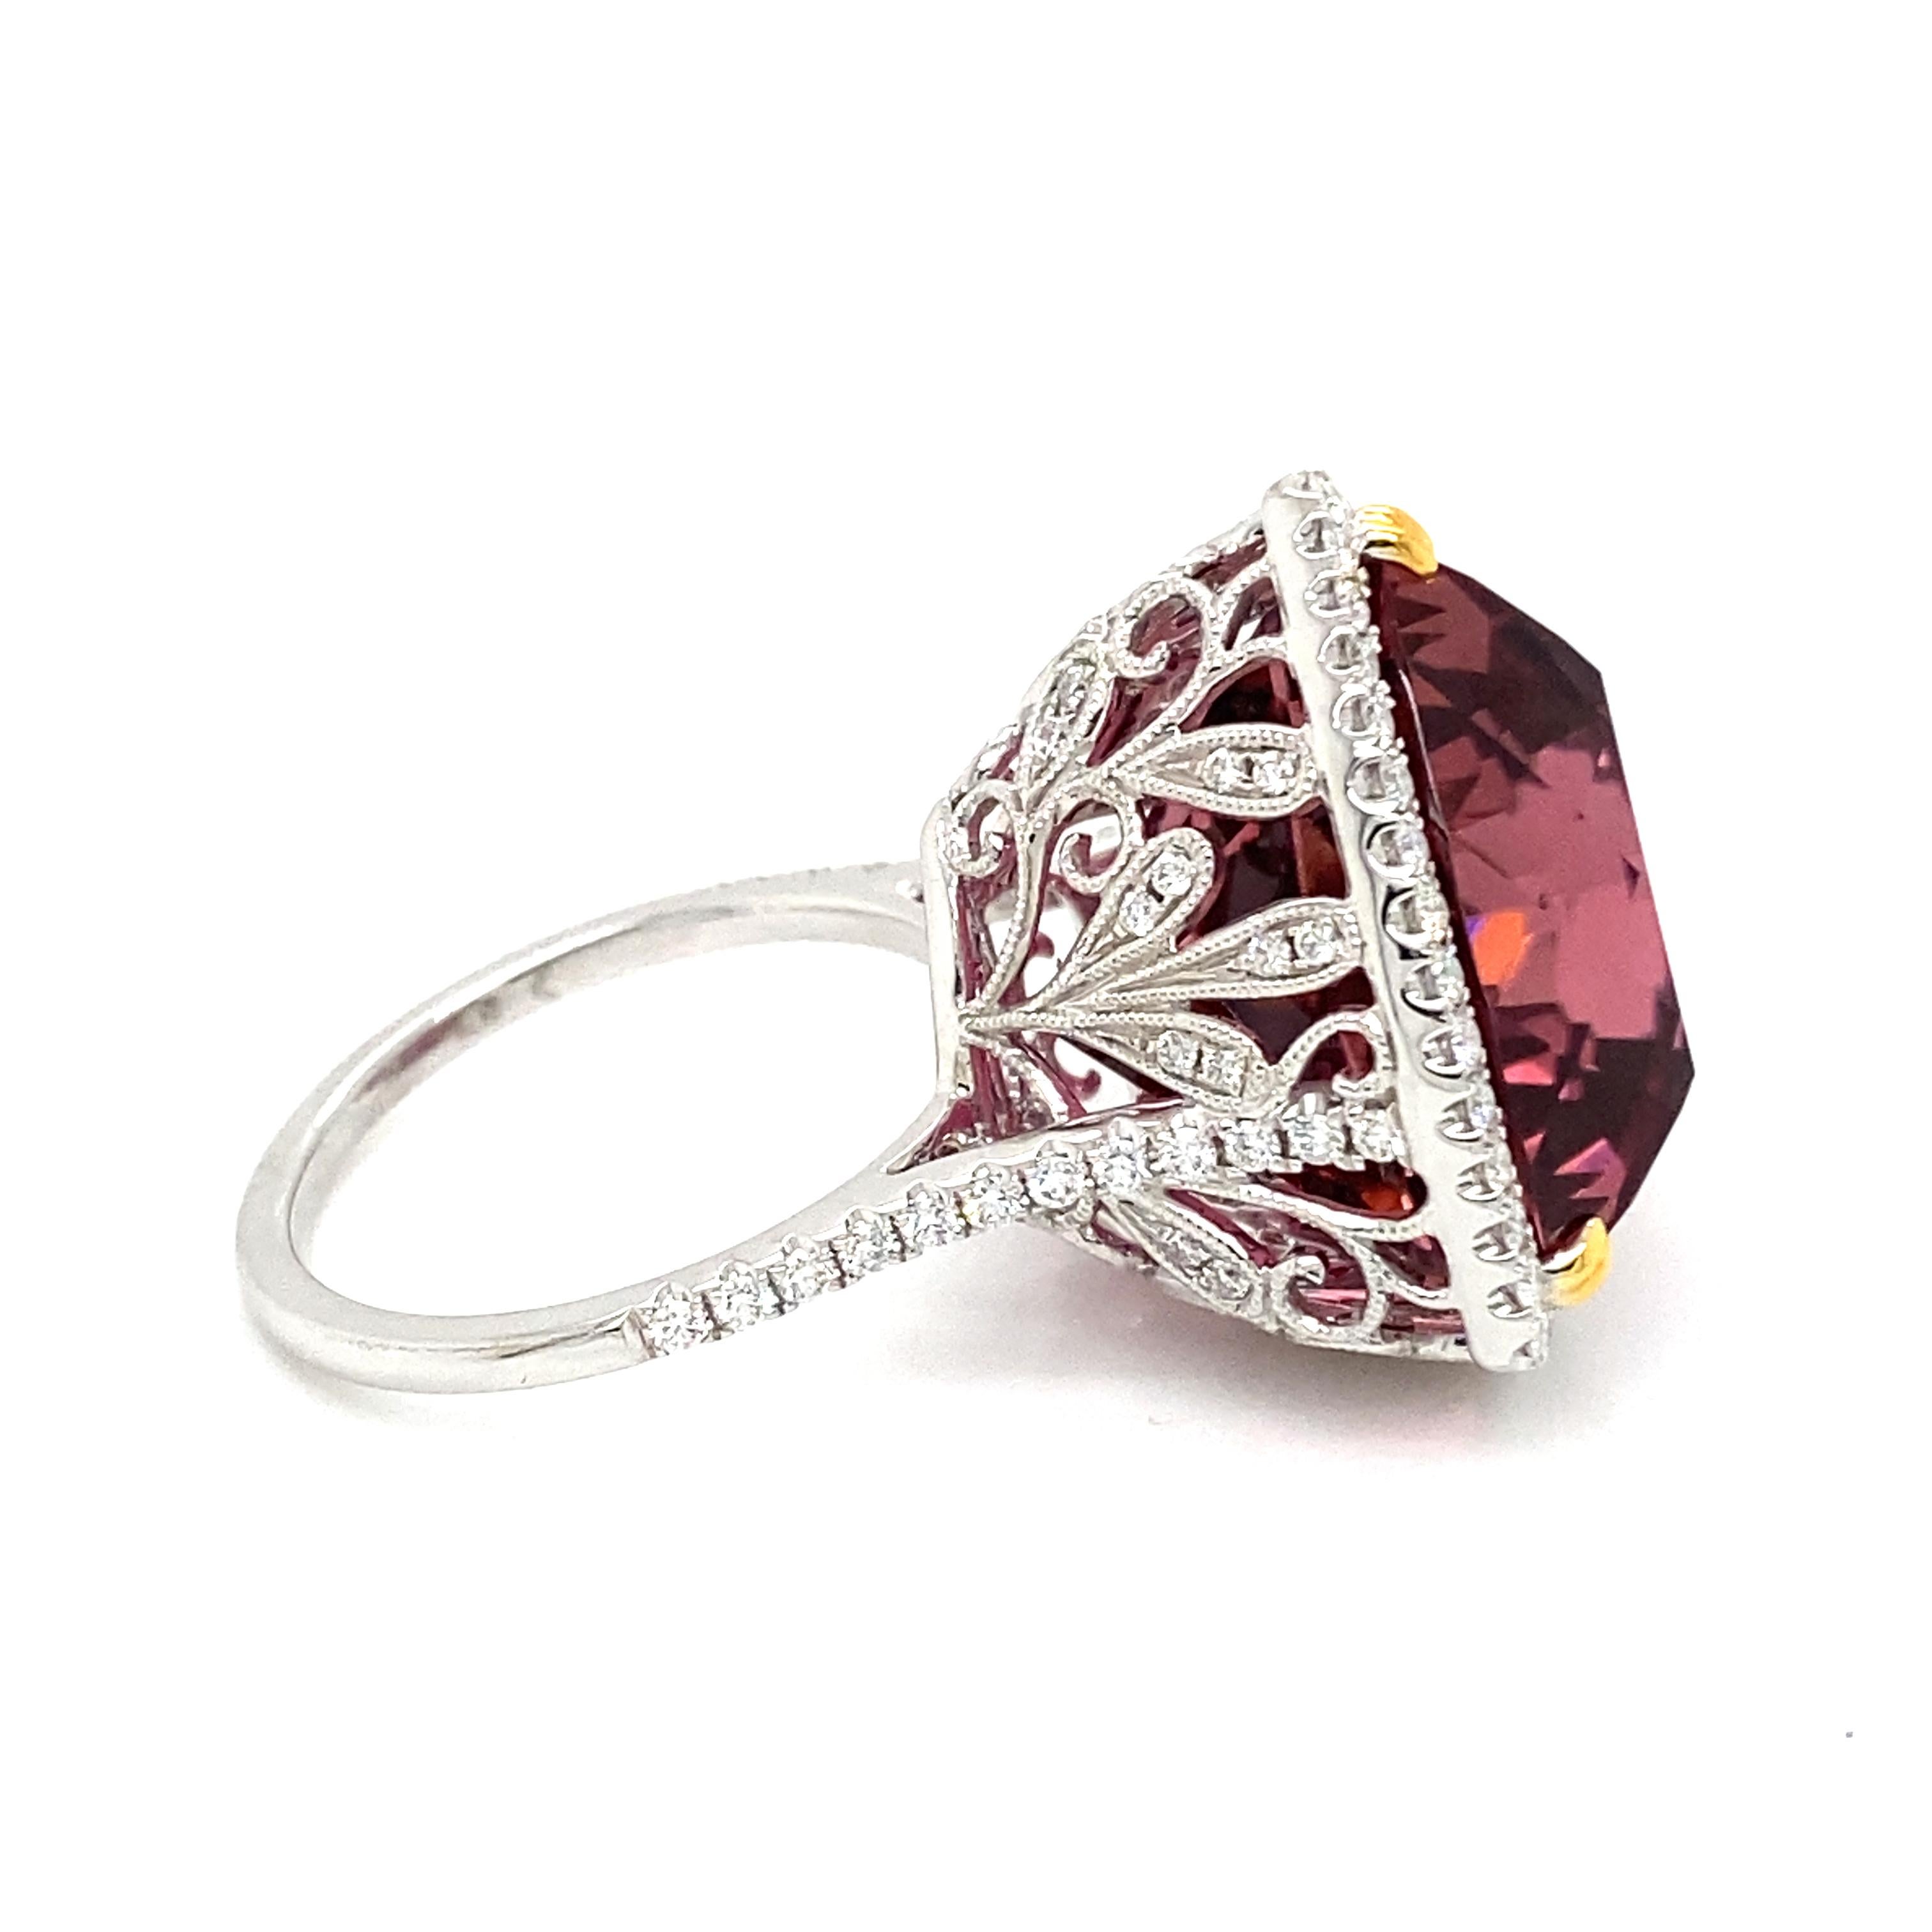 24.42 Carat Trillion Cut Rubellite Tourmaline and Diamond Cocktail Ring For Sale 1